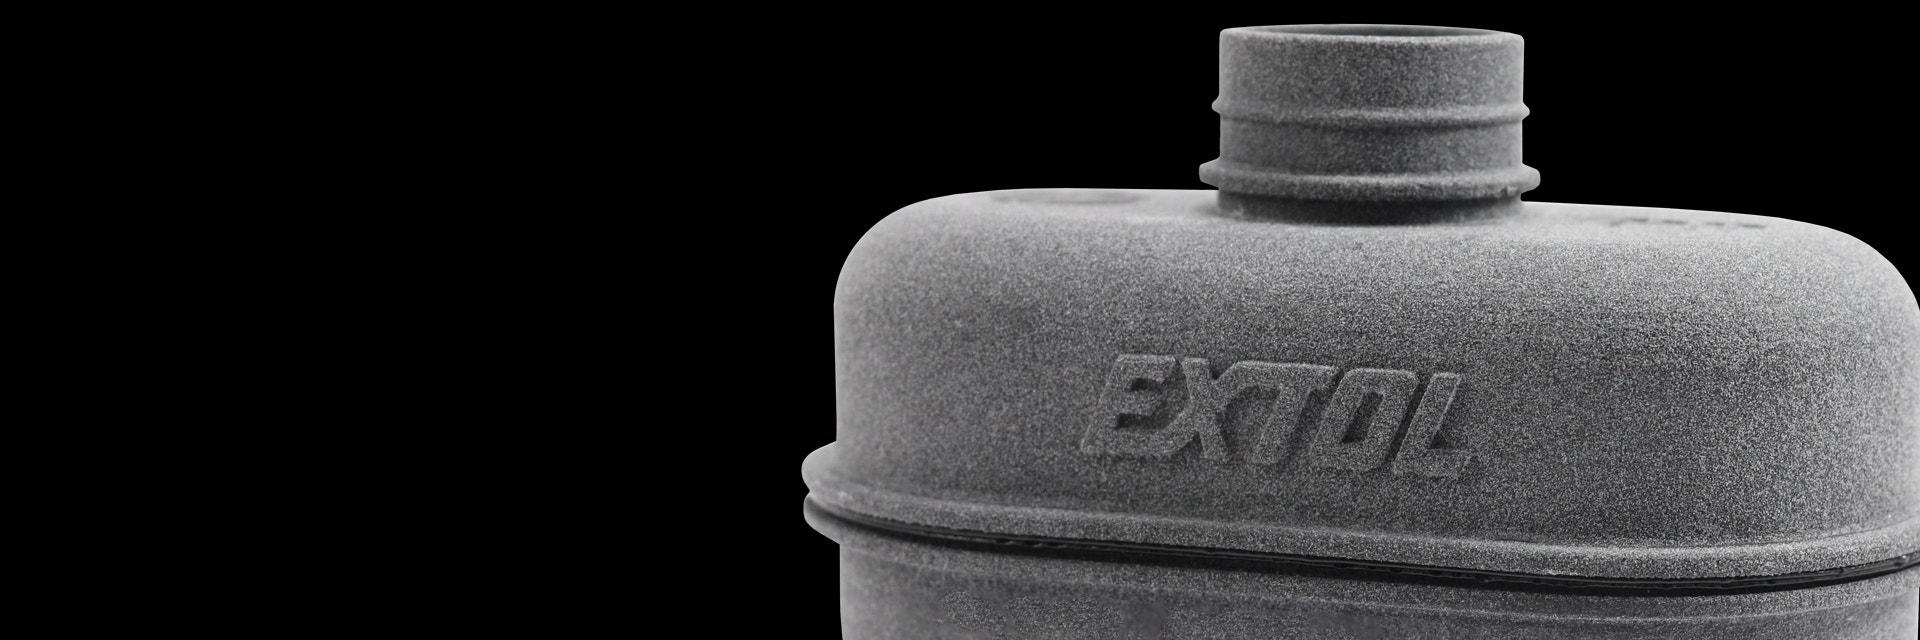 3D-printed part with the Extol logo